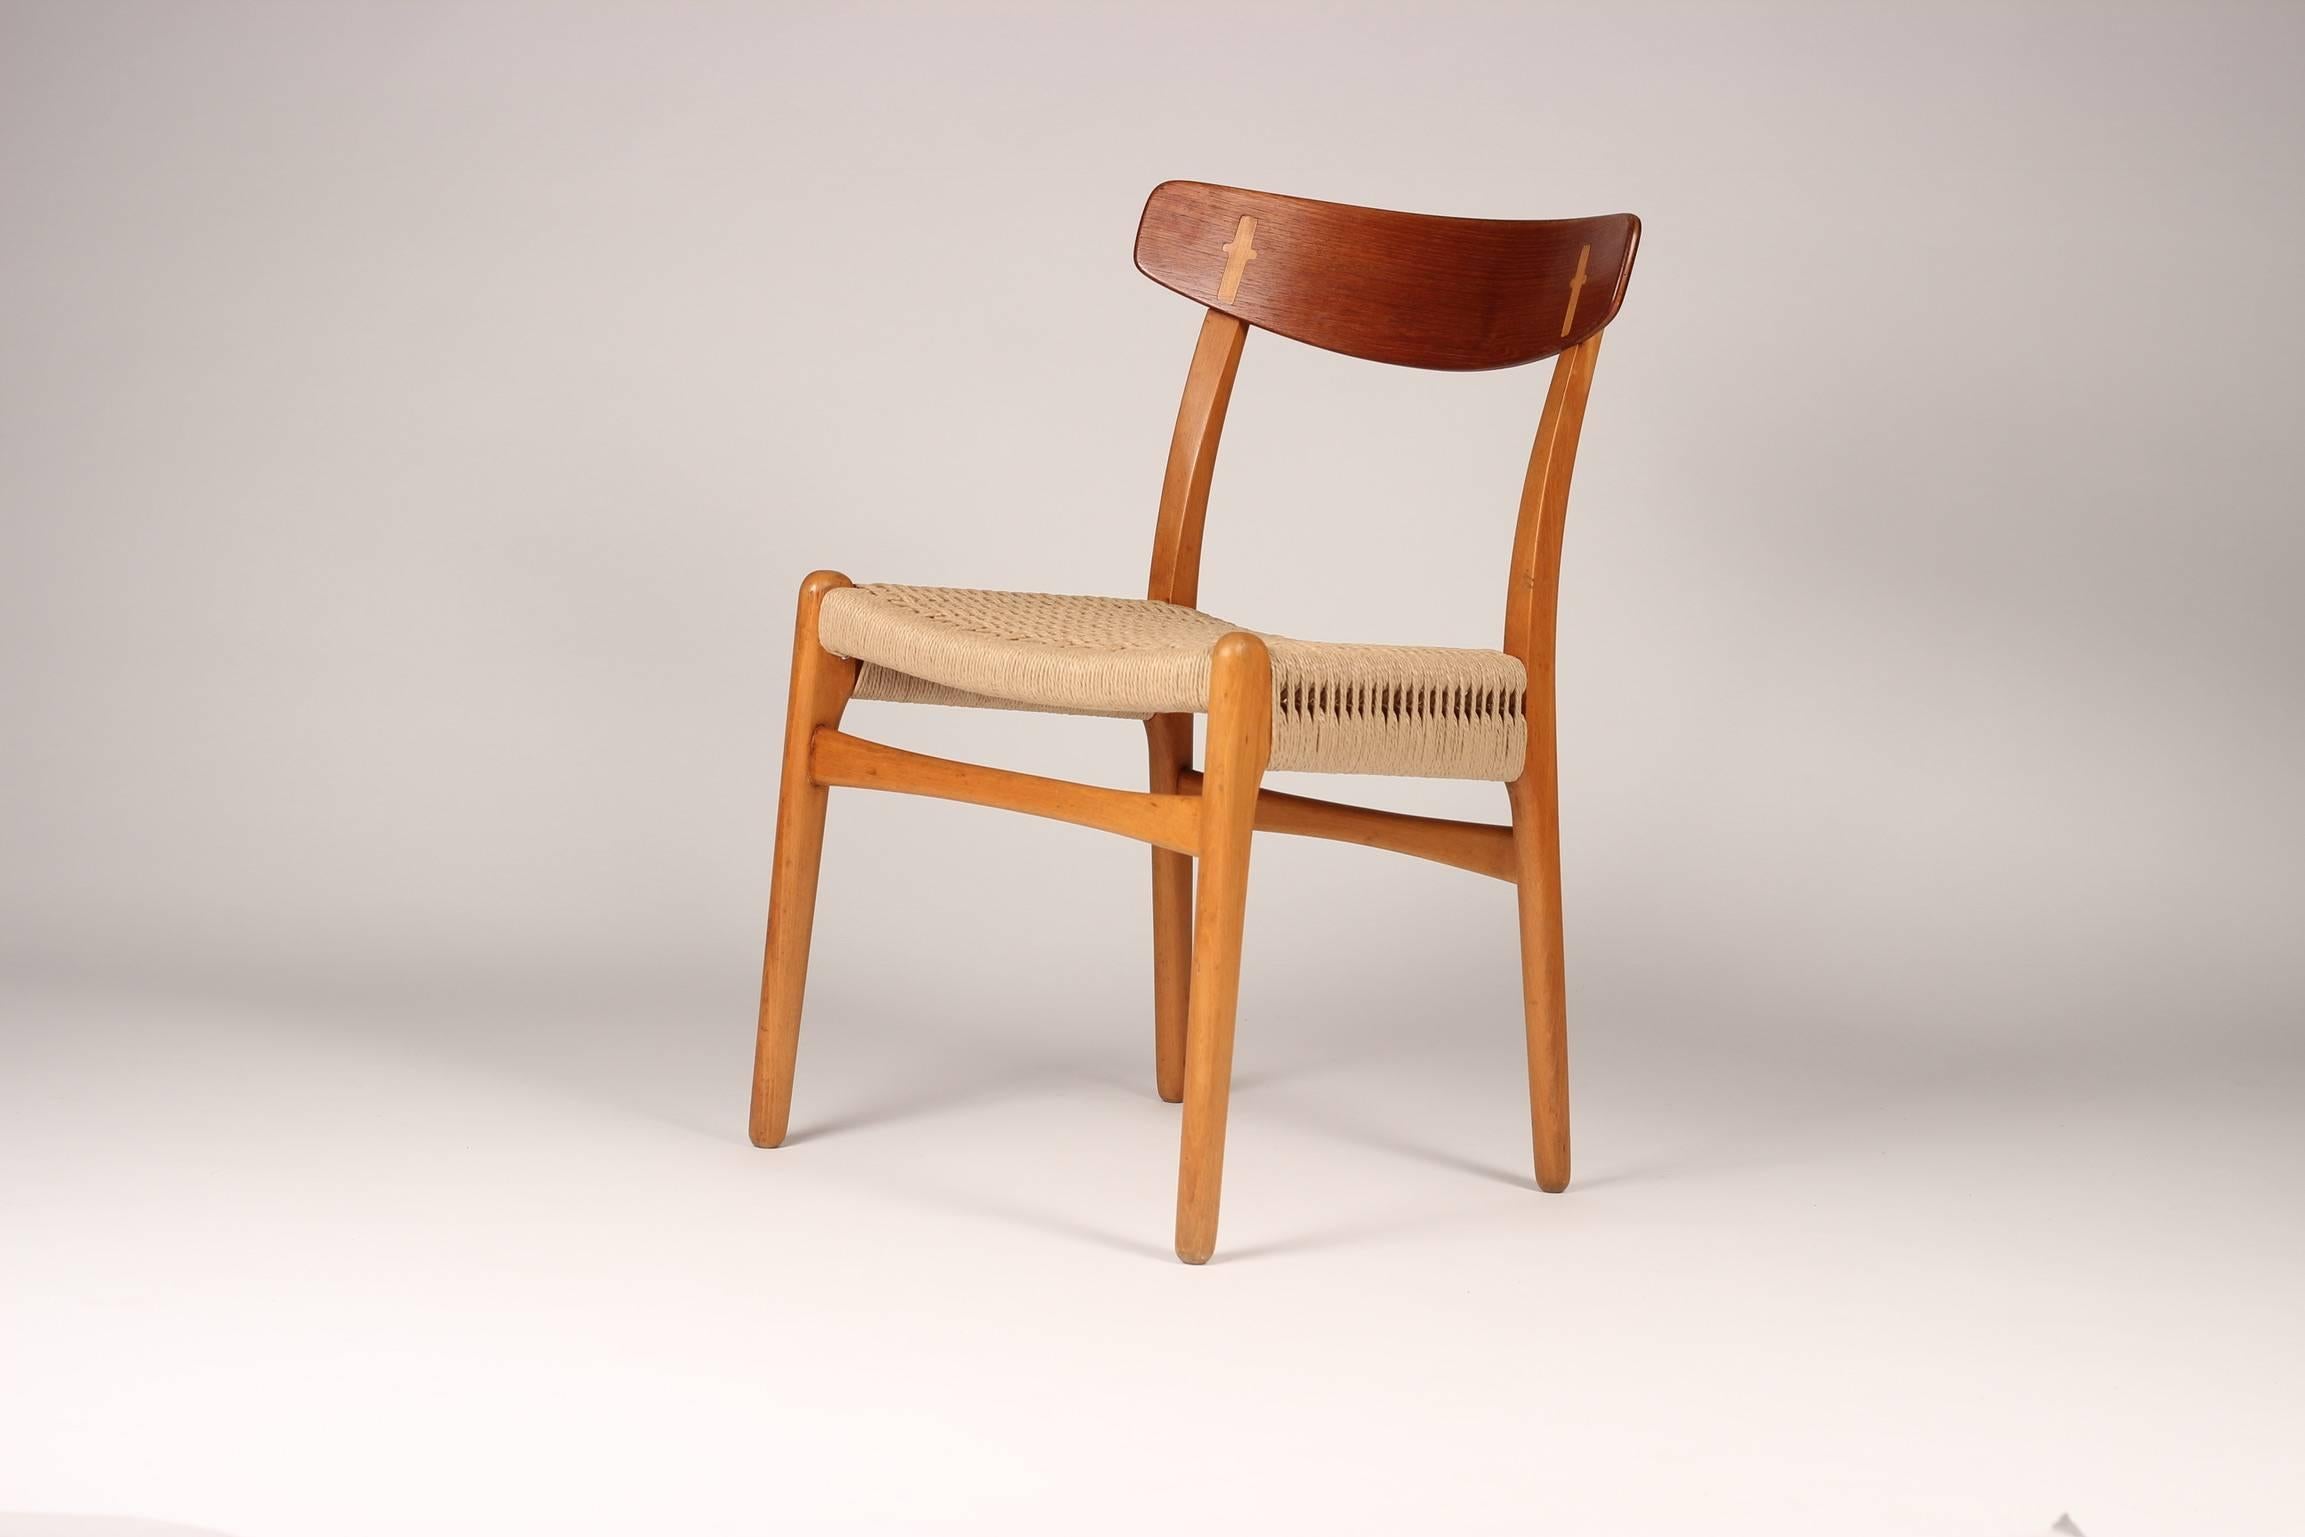 An early design from the master Hans Wegner's hand for Carl Hansen & Søn, this beautifully and sympathetically cleaned, restored and re-Danish corded set of chairs are in wonderful condition and ready to be appreciated for another 60 years of